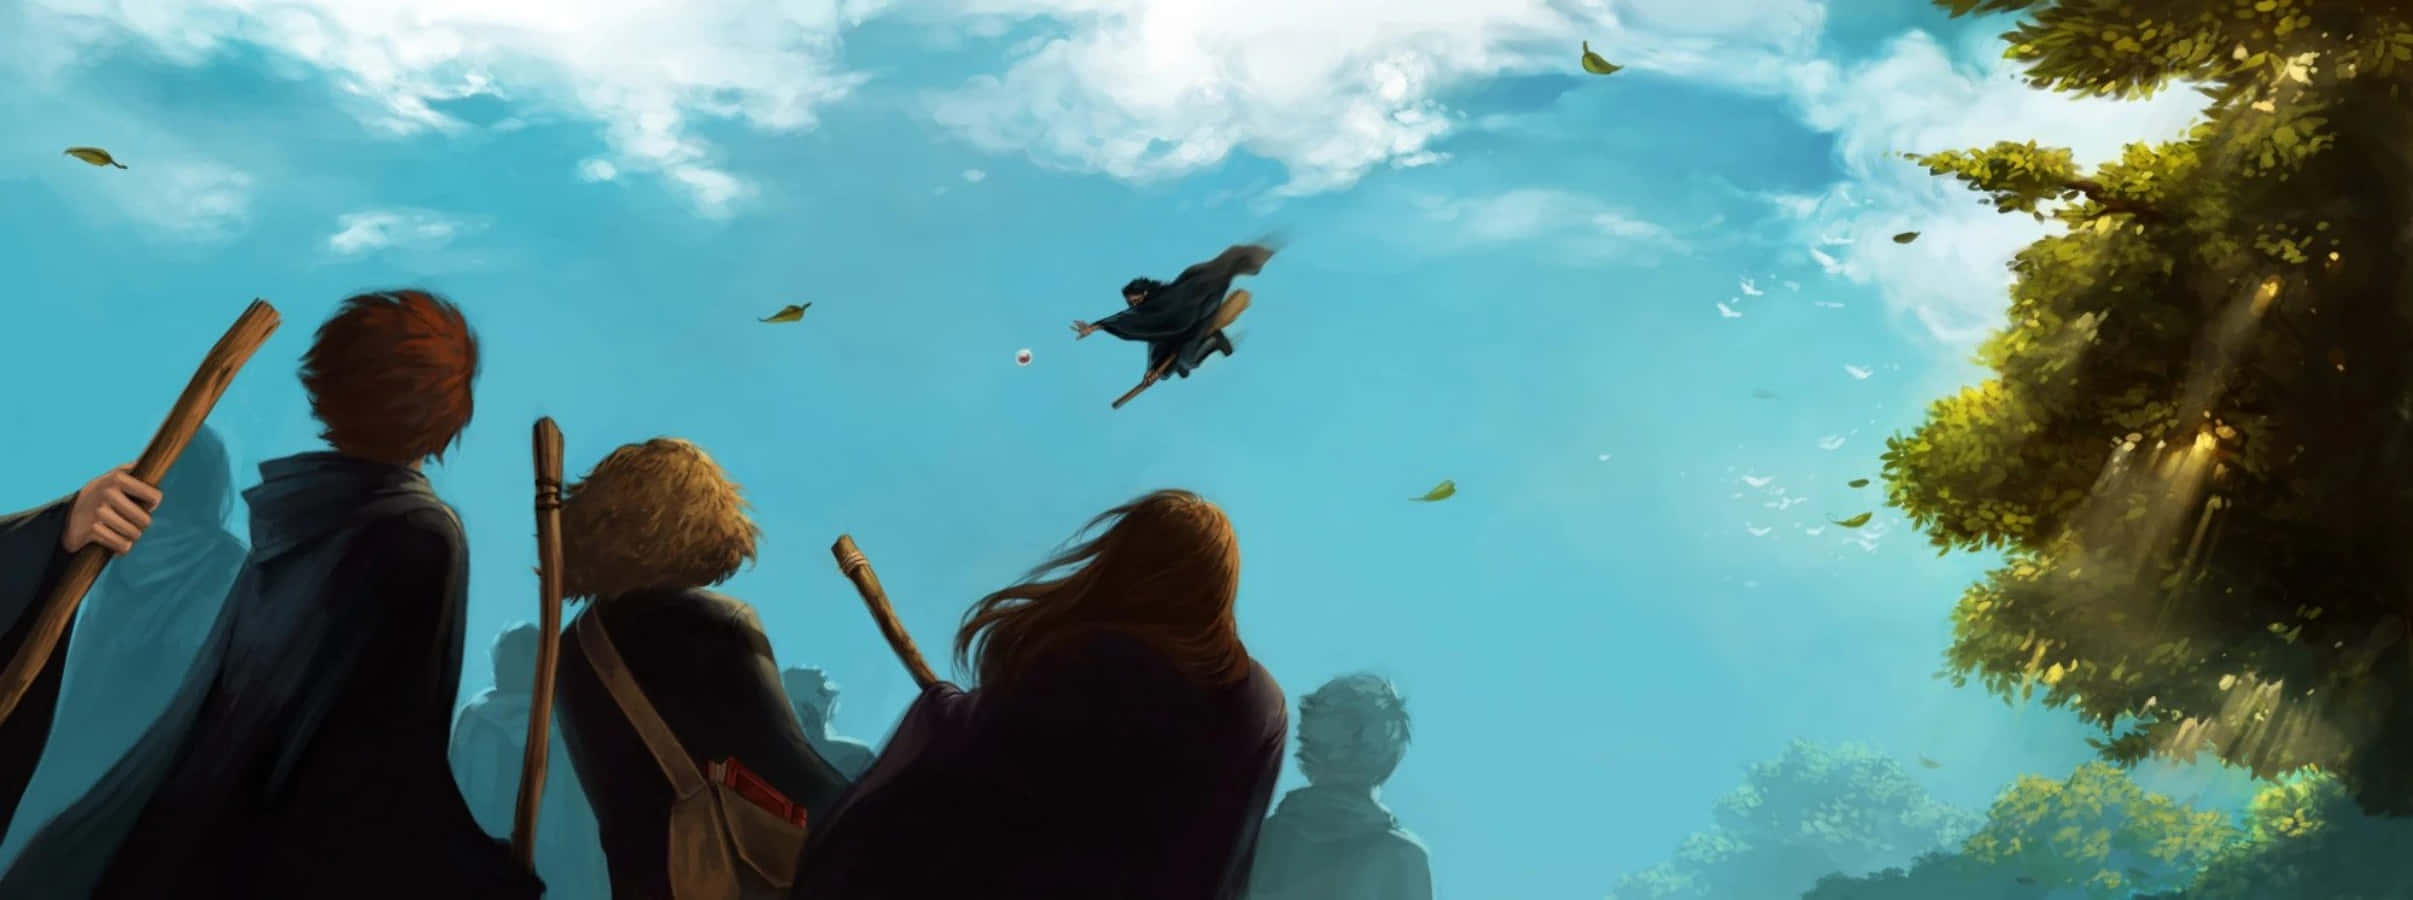 A student learns the art of flying during their Hogwarts Flying Lessons. Wallpaper